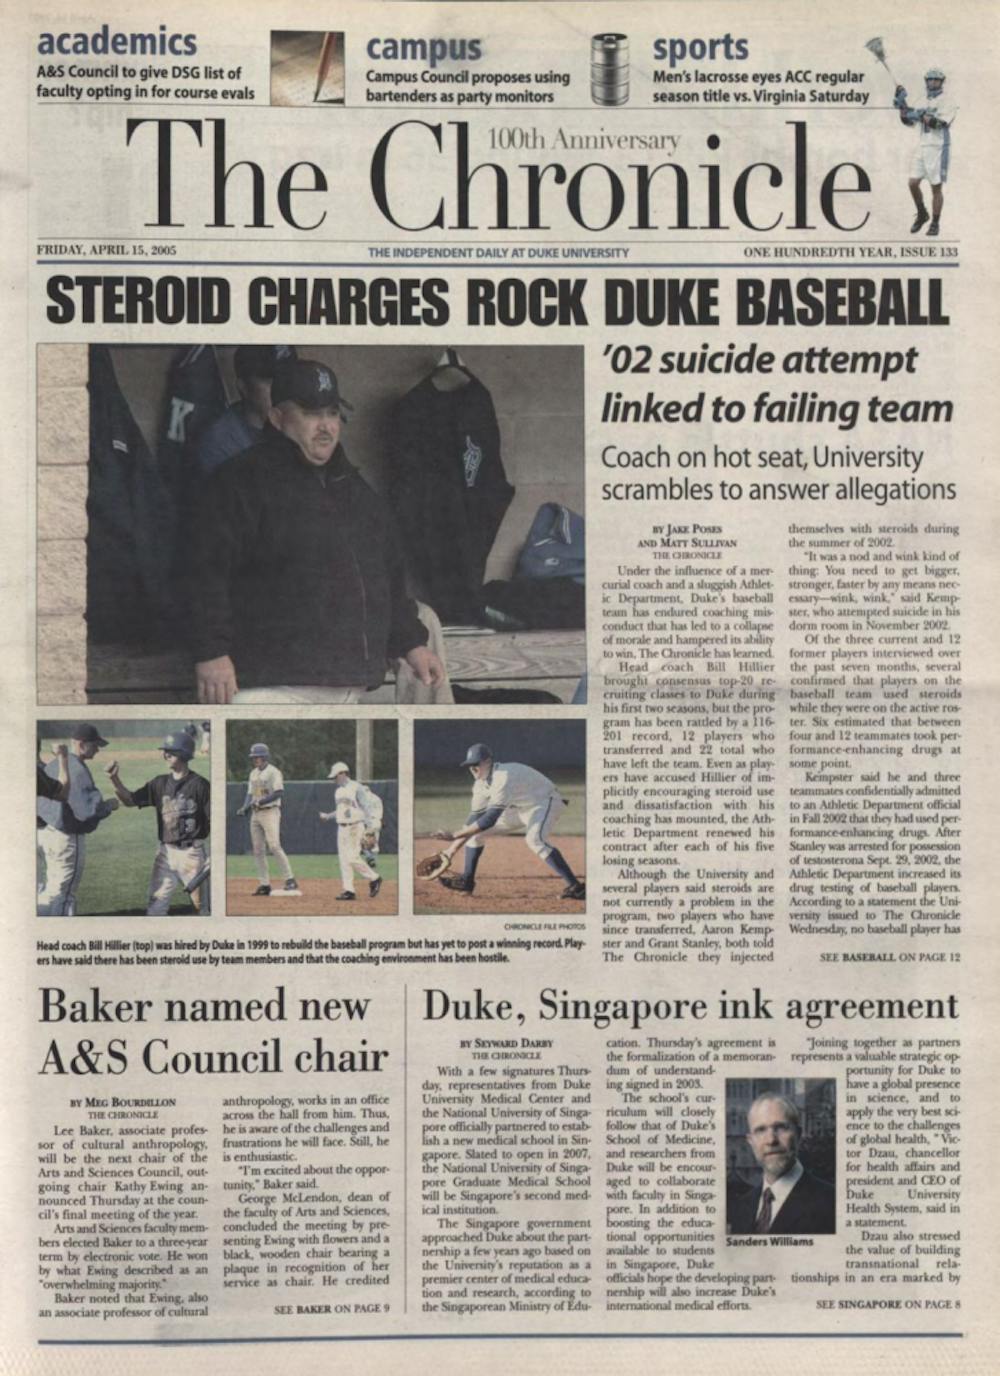 <p>An investigation into allegations of steroid use by The Chronicle in 2005 led to the ouster of Duke's head coach, Bill Hillier.</p>